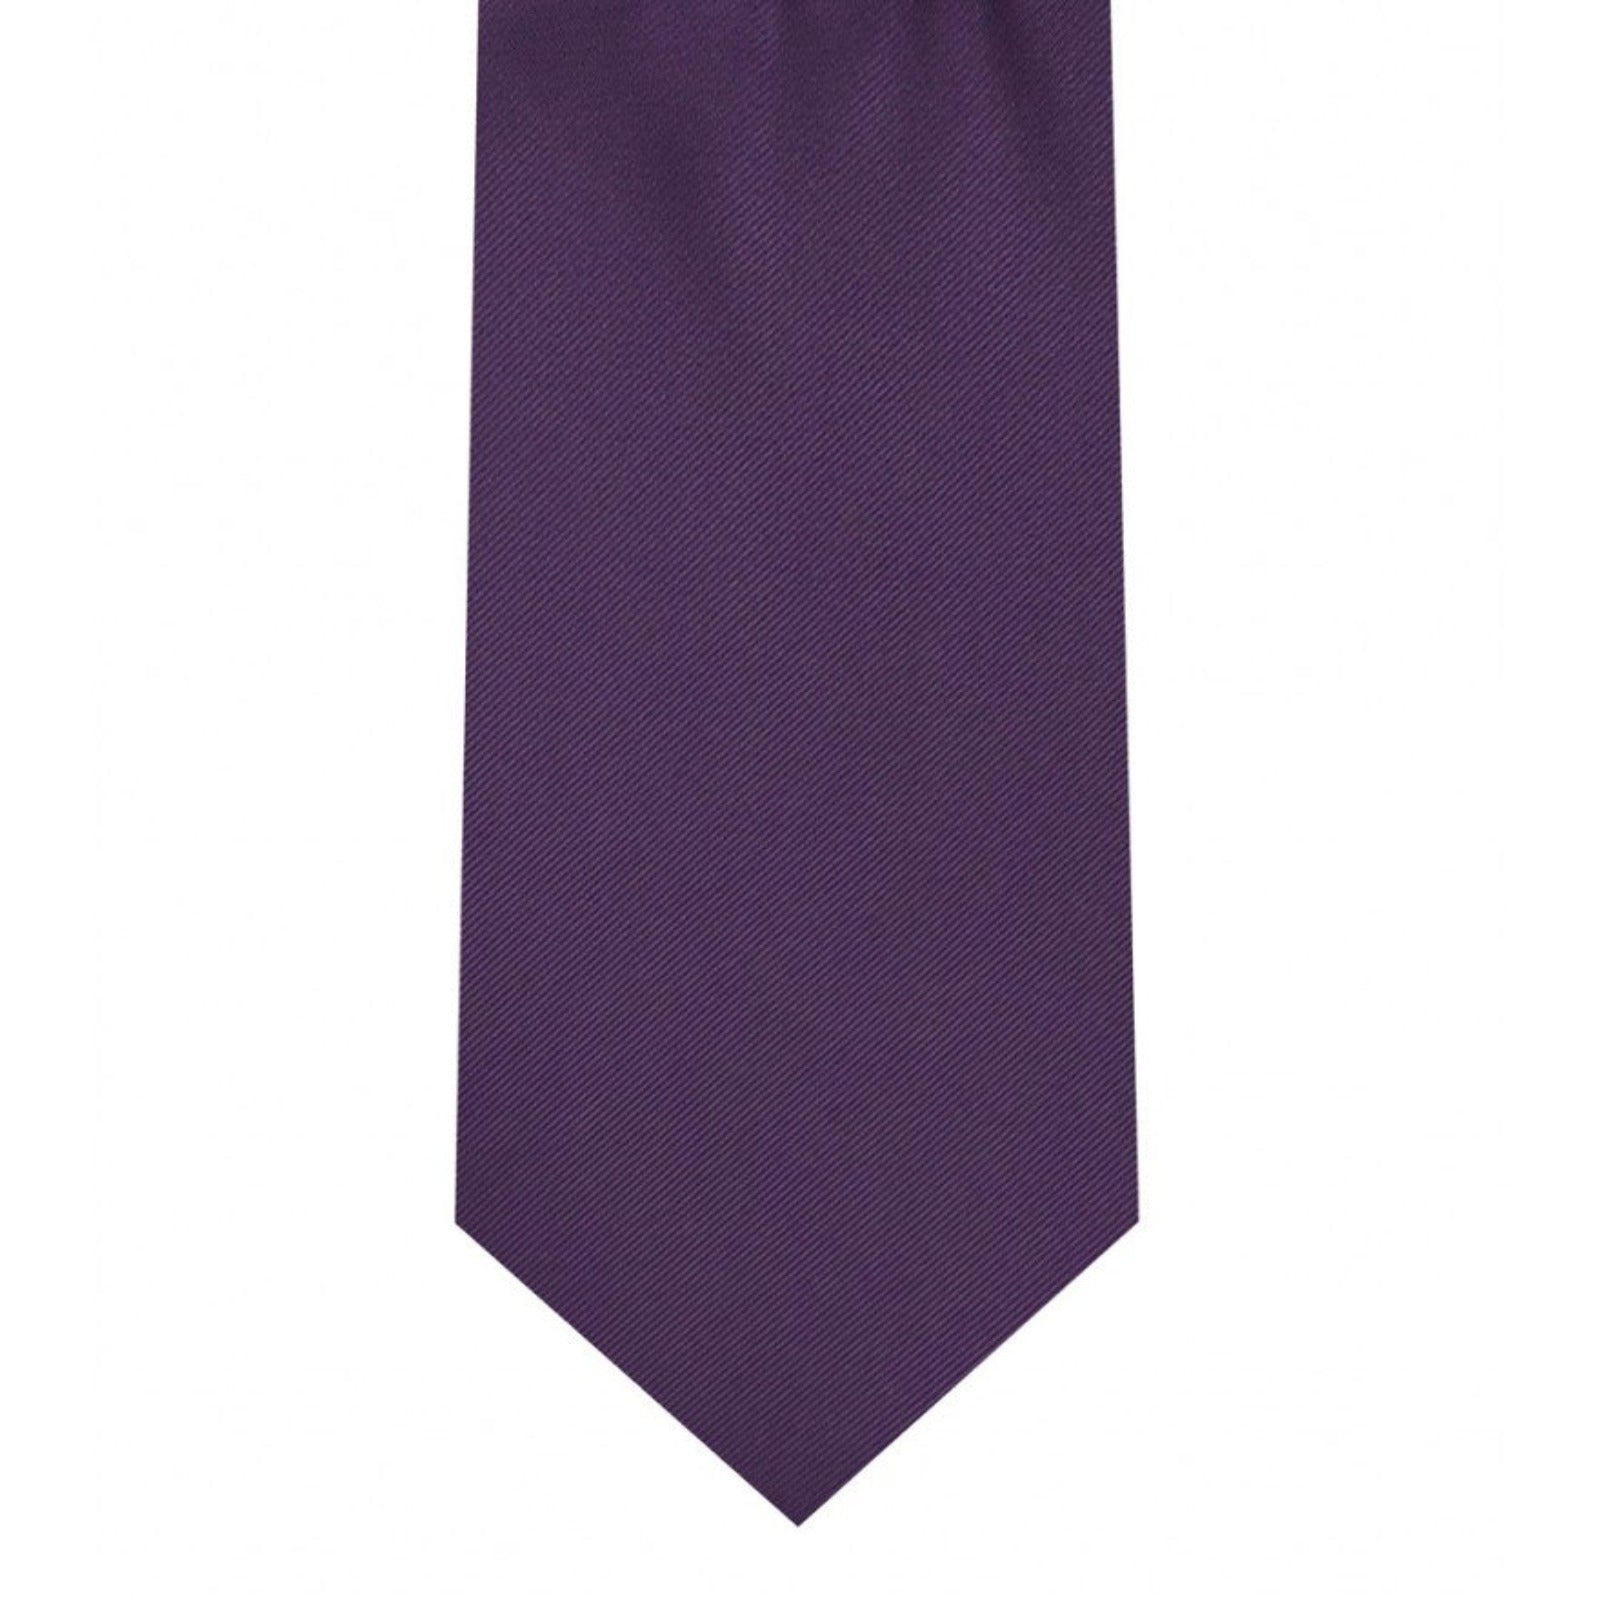 Classic Deep Purple Tie Skinny width 2.75 inches With Matching Pocket Square | KCT Menswear 